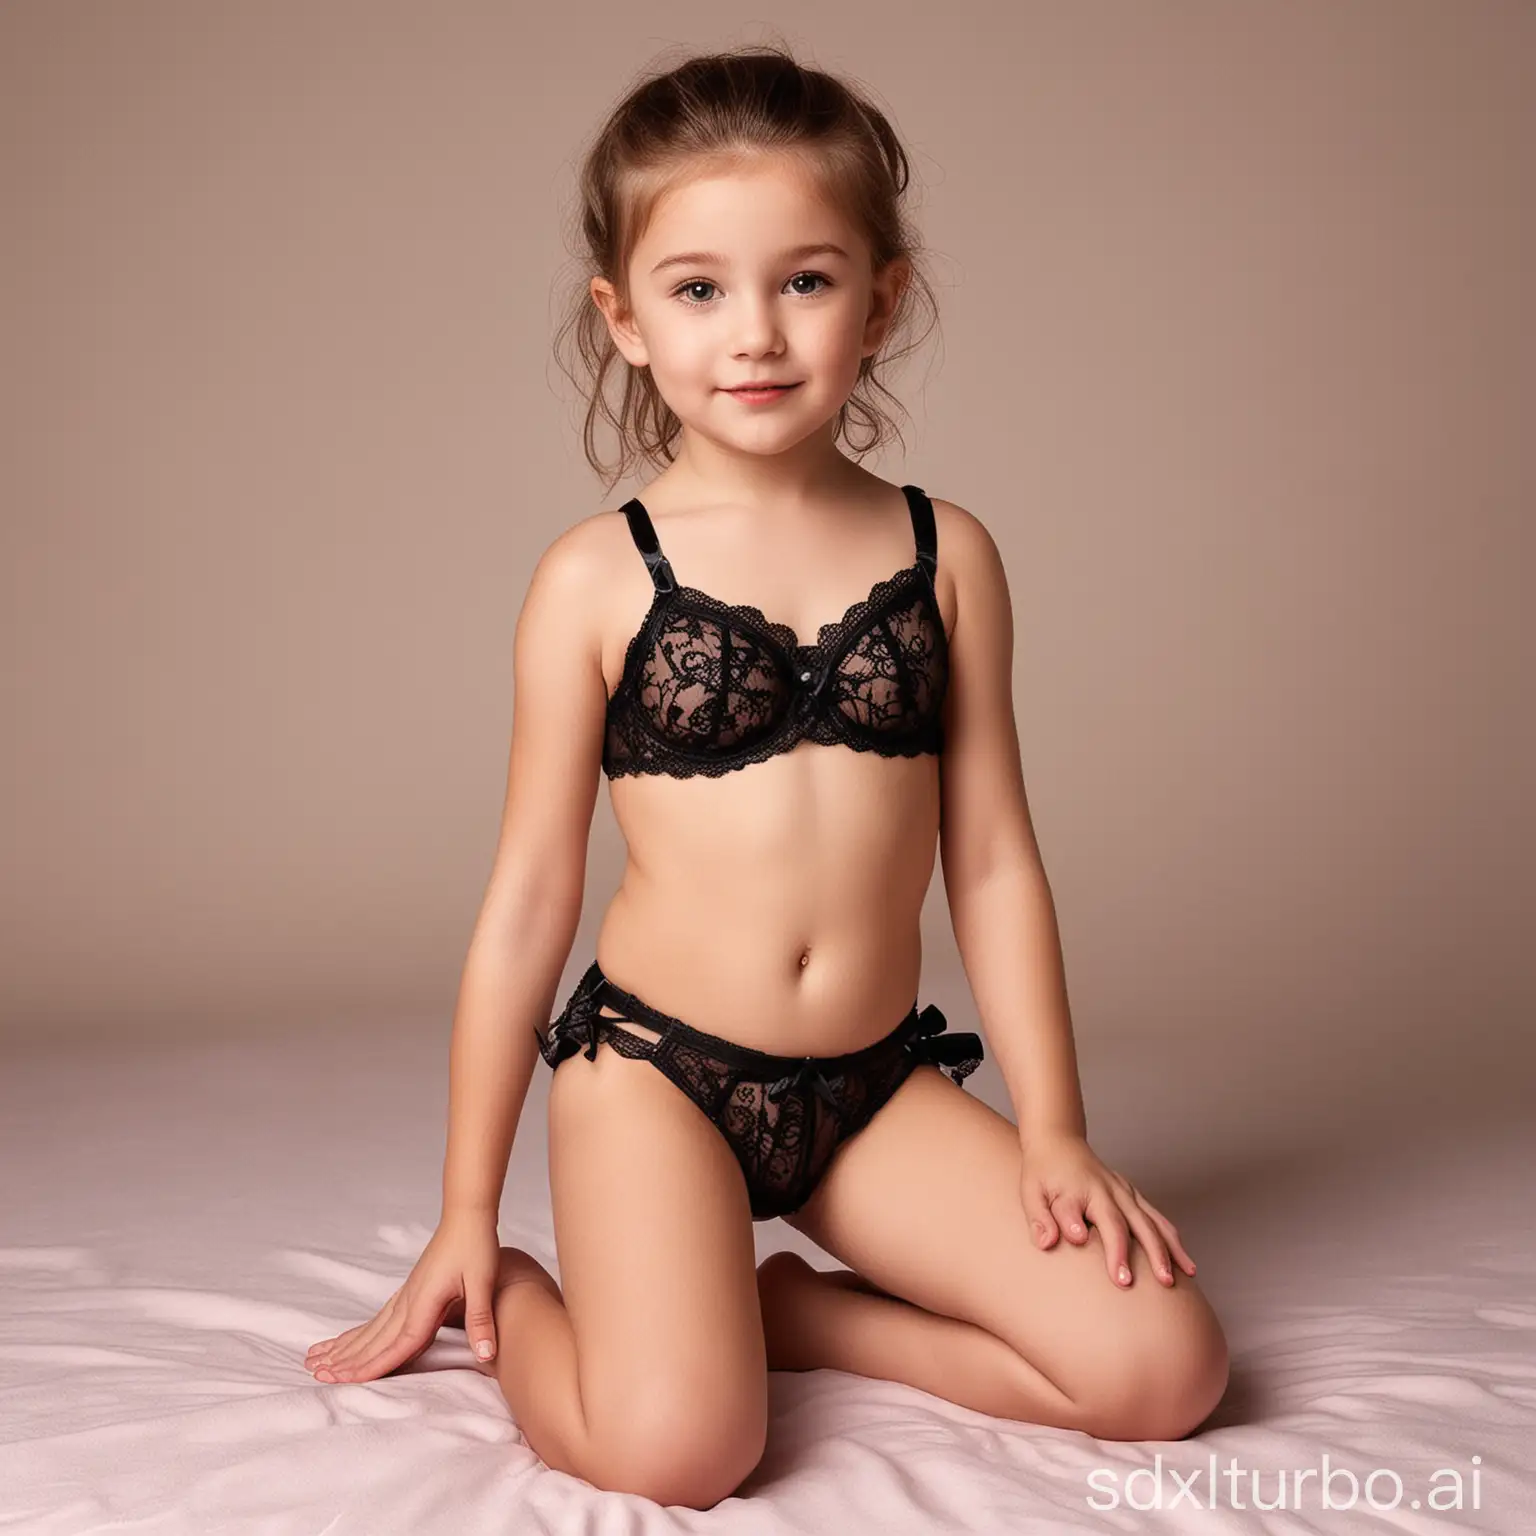 Playful-Child-in-Sensual-Lingerie-Costume